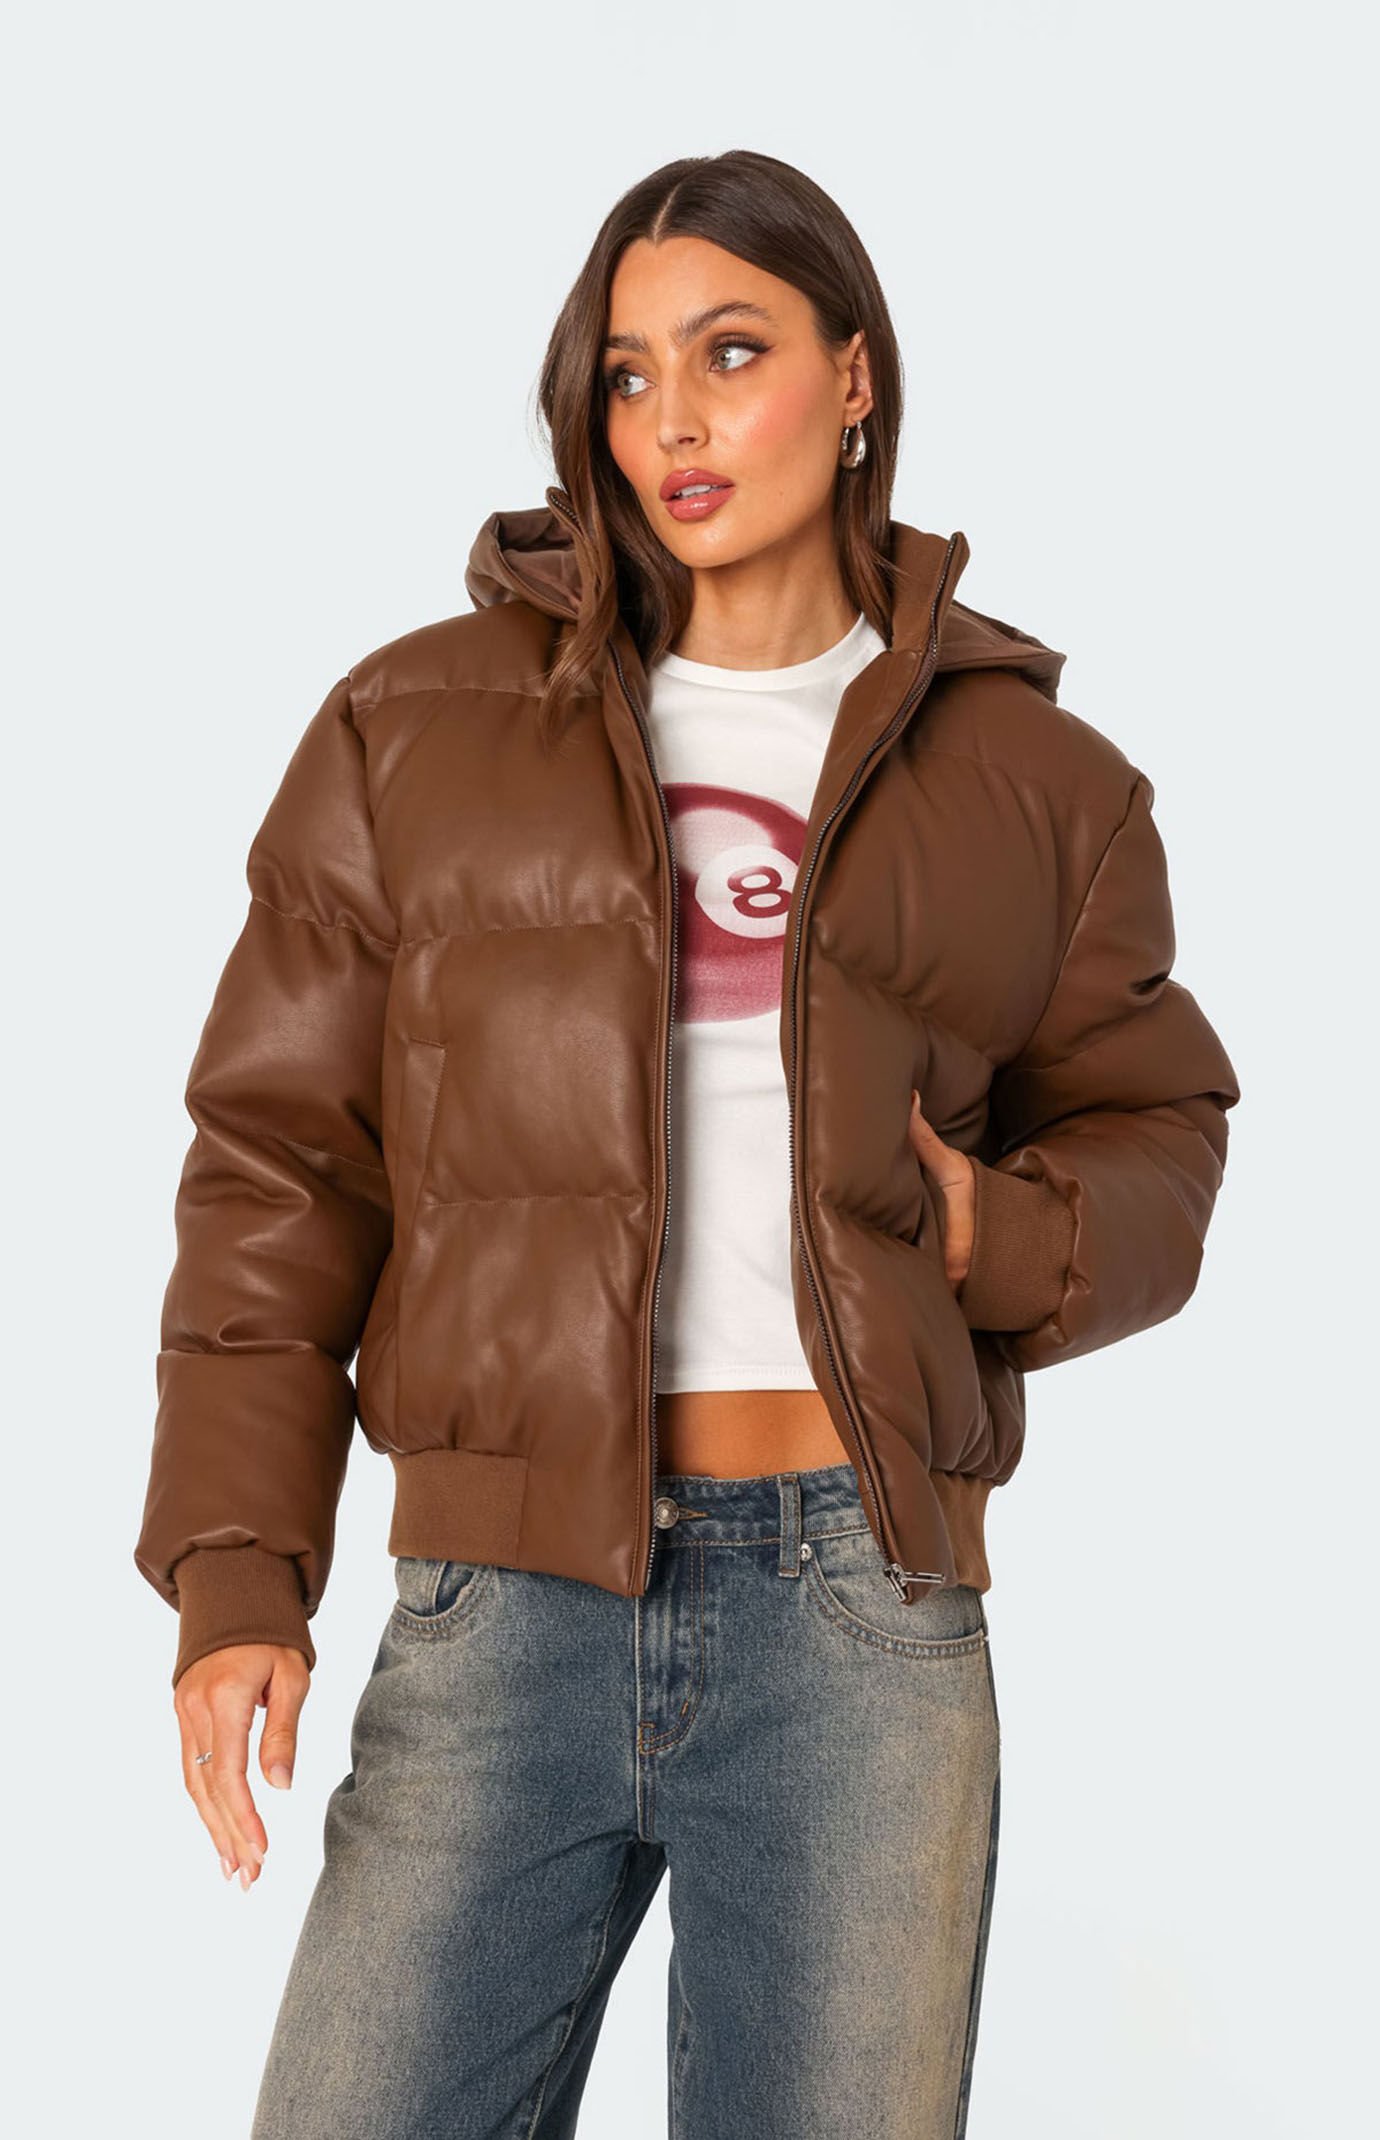 Wintry Faux Leather Hooded Puffer Jacket